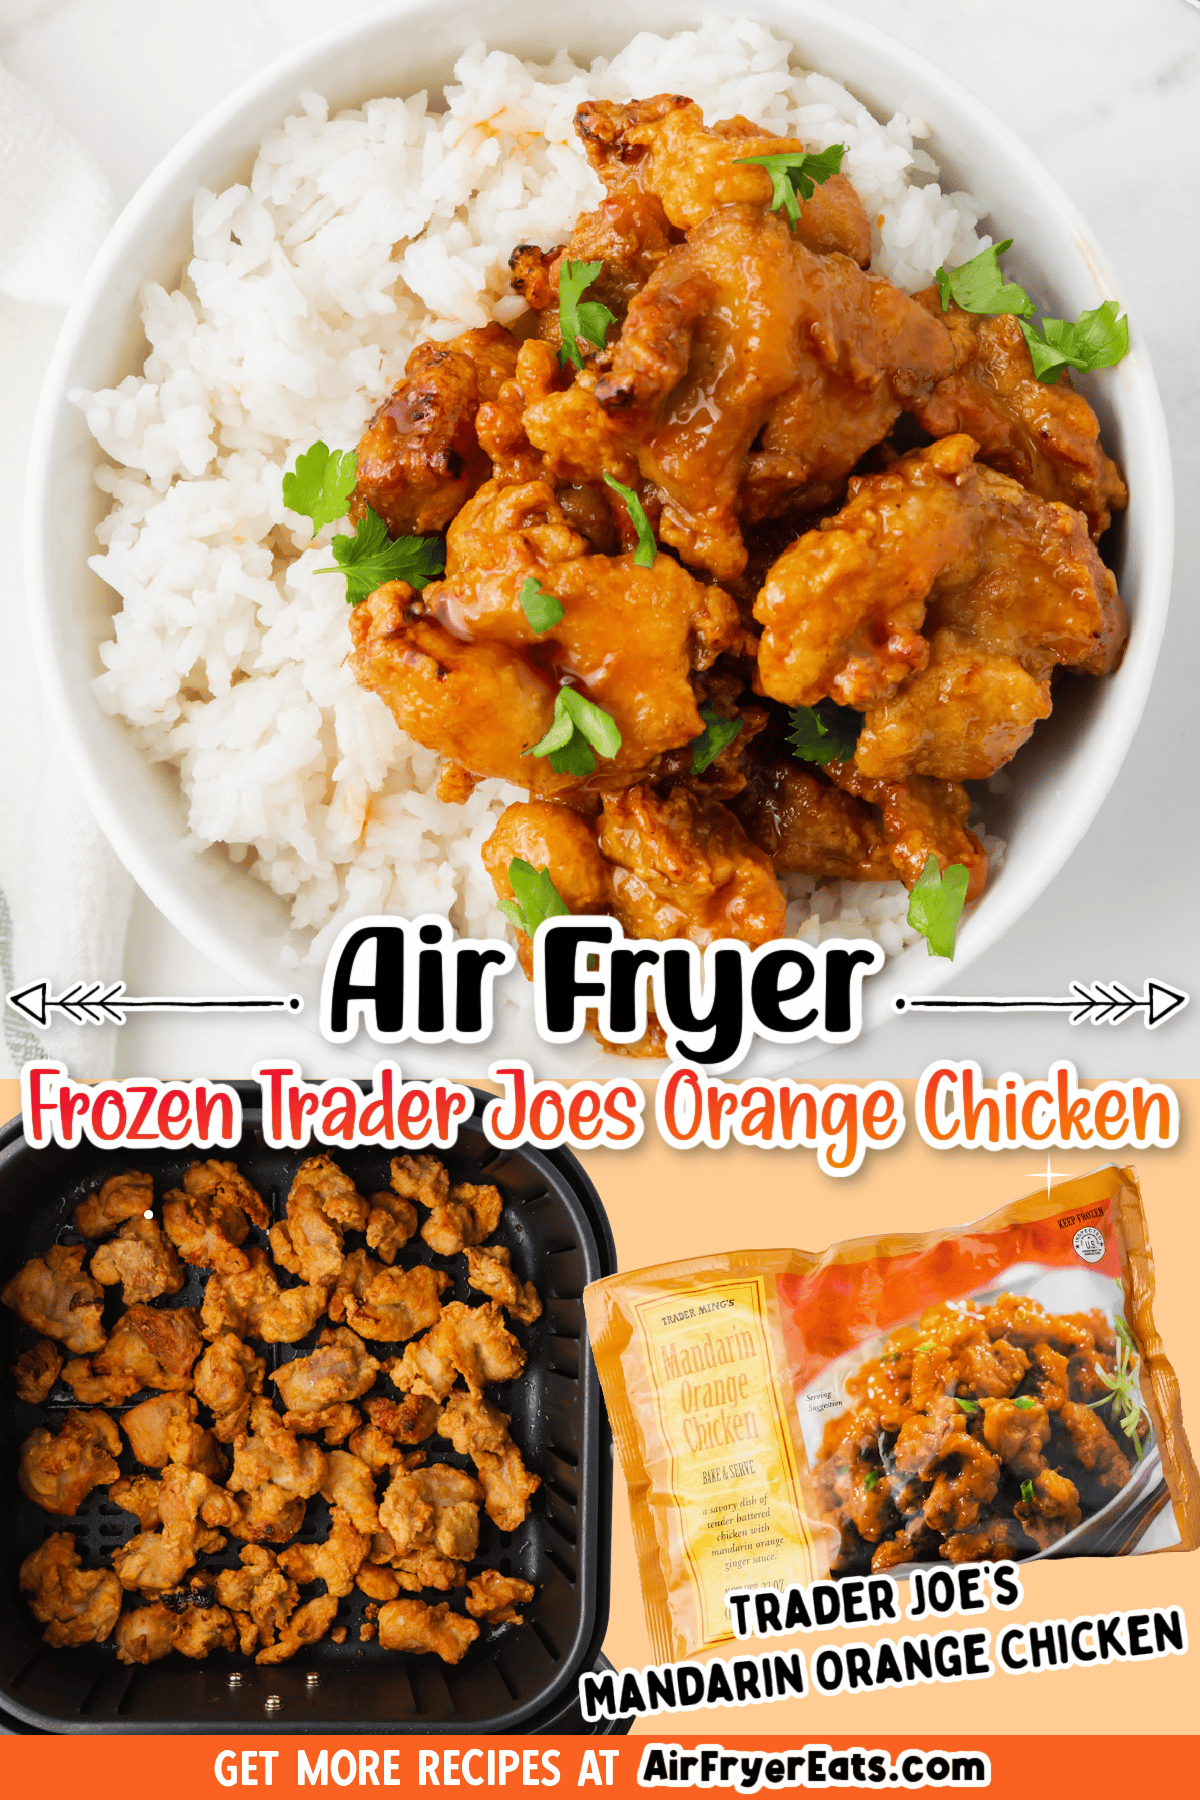 This Trader Joe's Orange Chicken Air Fryer Recipe will help you to make this delicious and popular frozen Chinese chicken in just minutes. via @vegetarianmamma